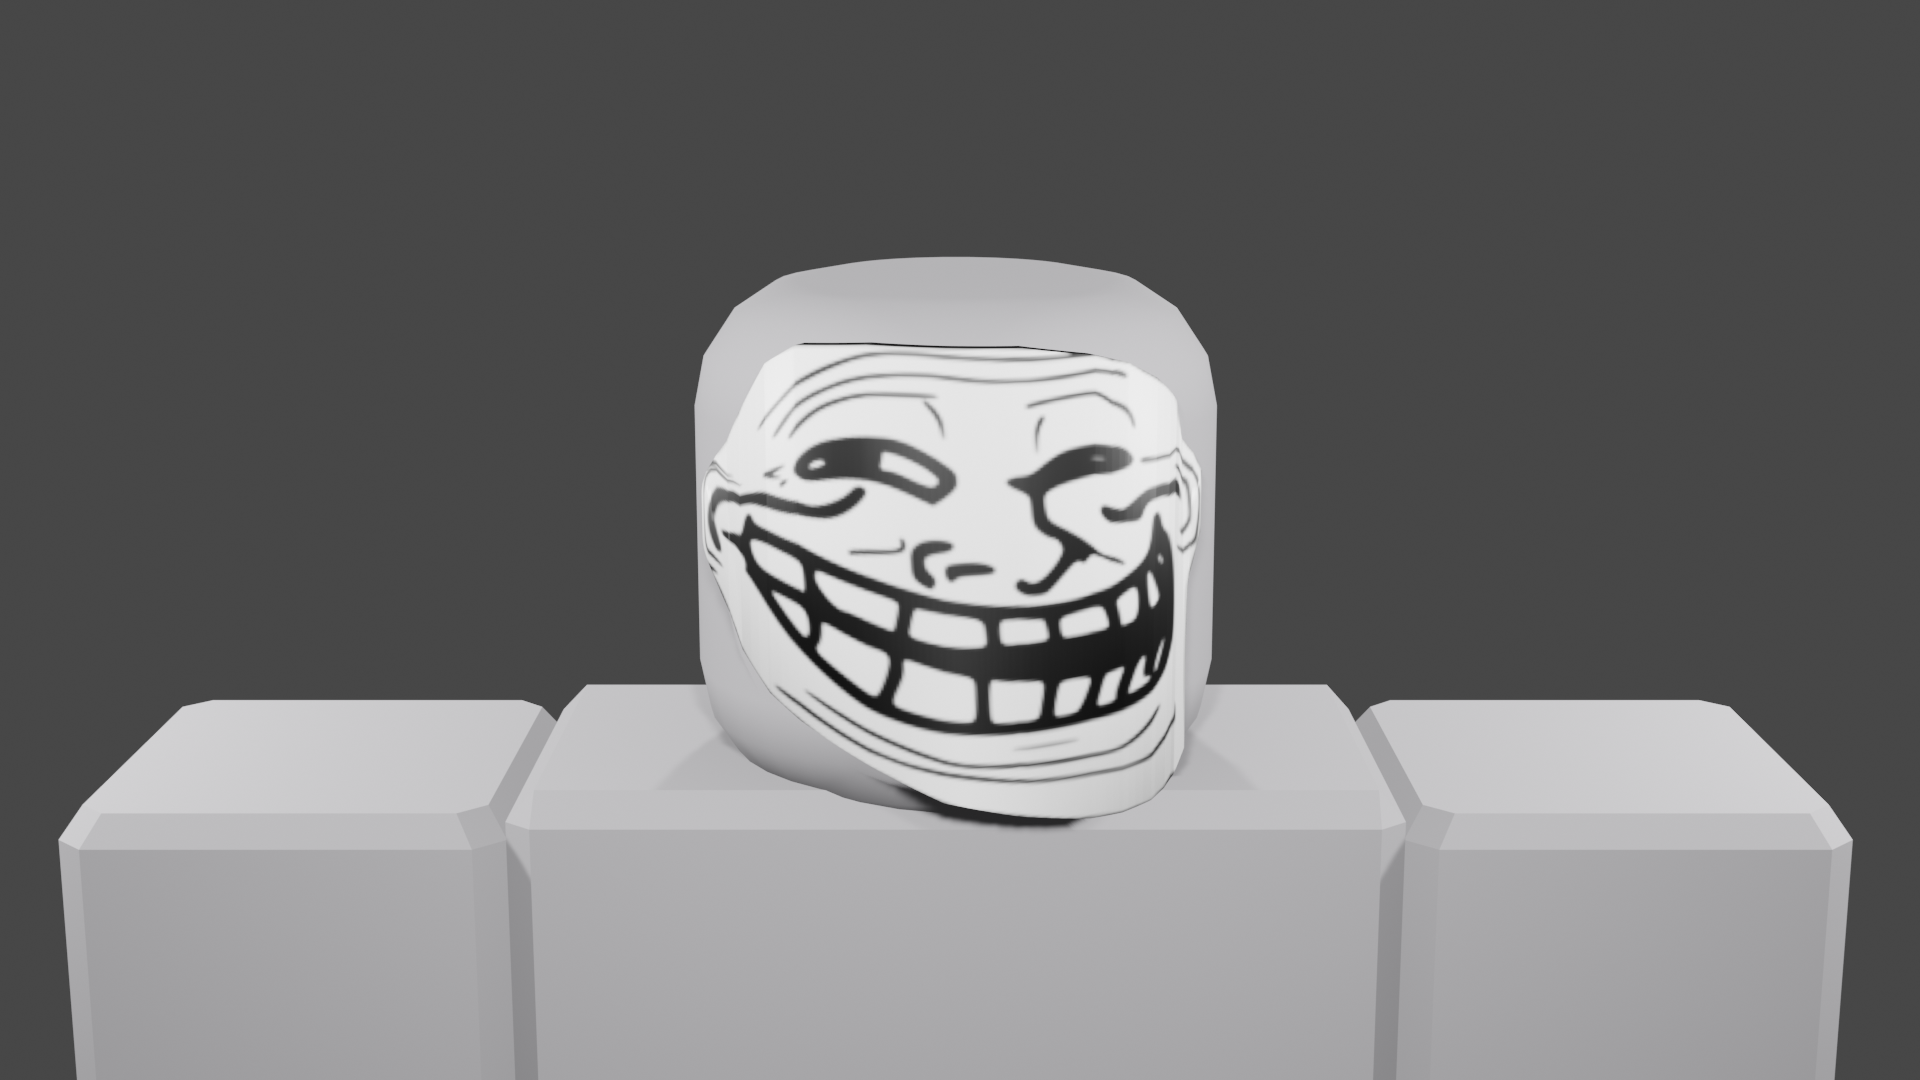 Laidbackdeveloper On Twitter New Blender Logo And Troll Face Masks Robloxugc Robloxdev - roblox trolling face